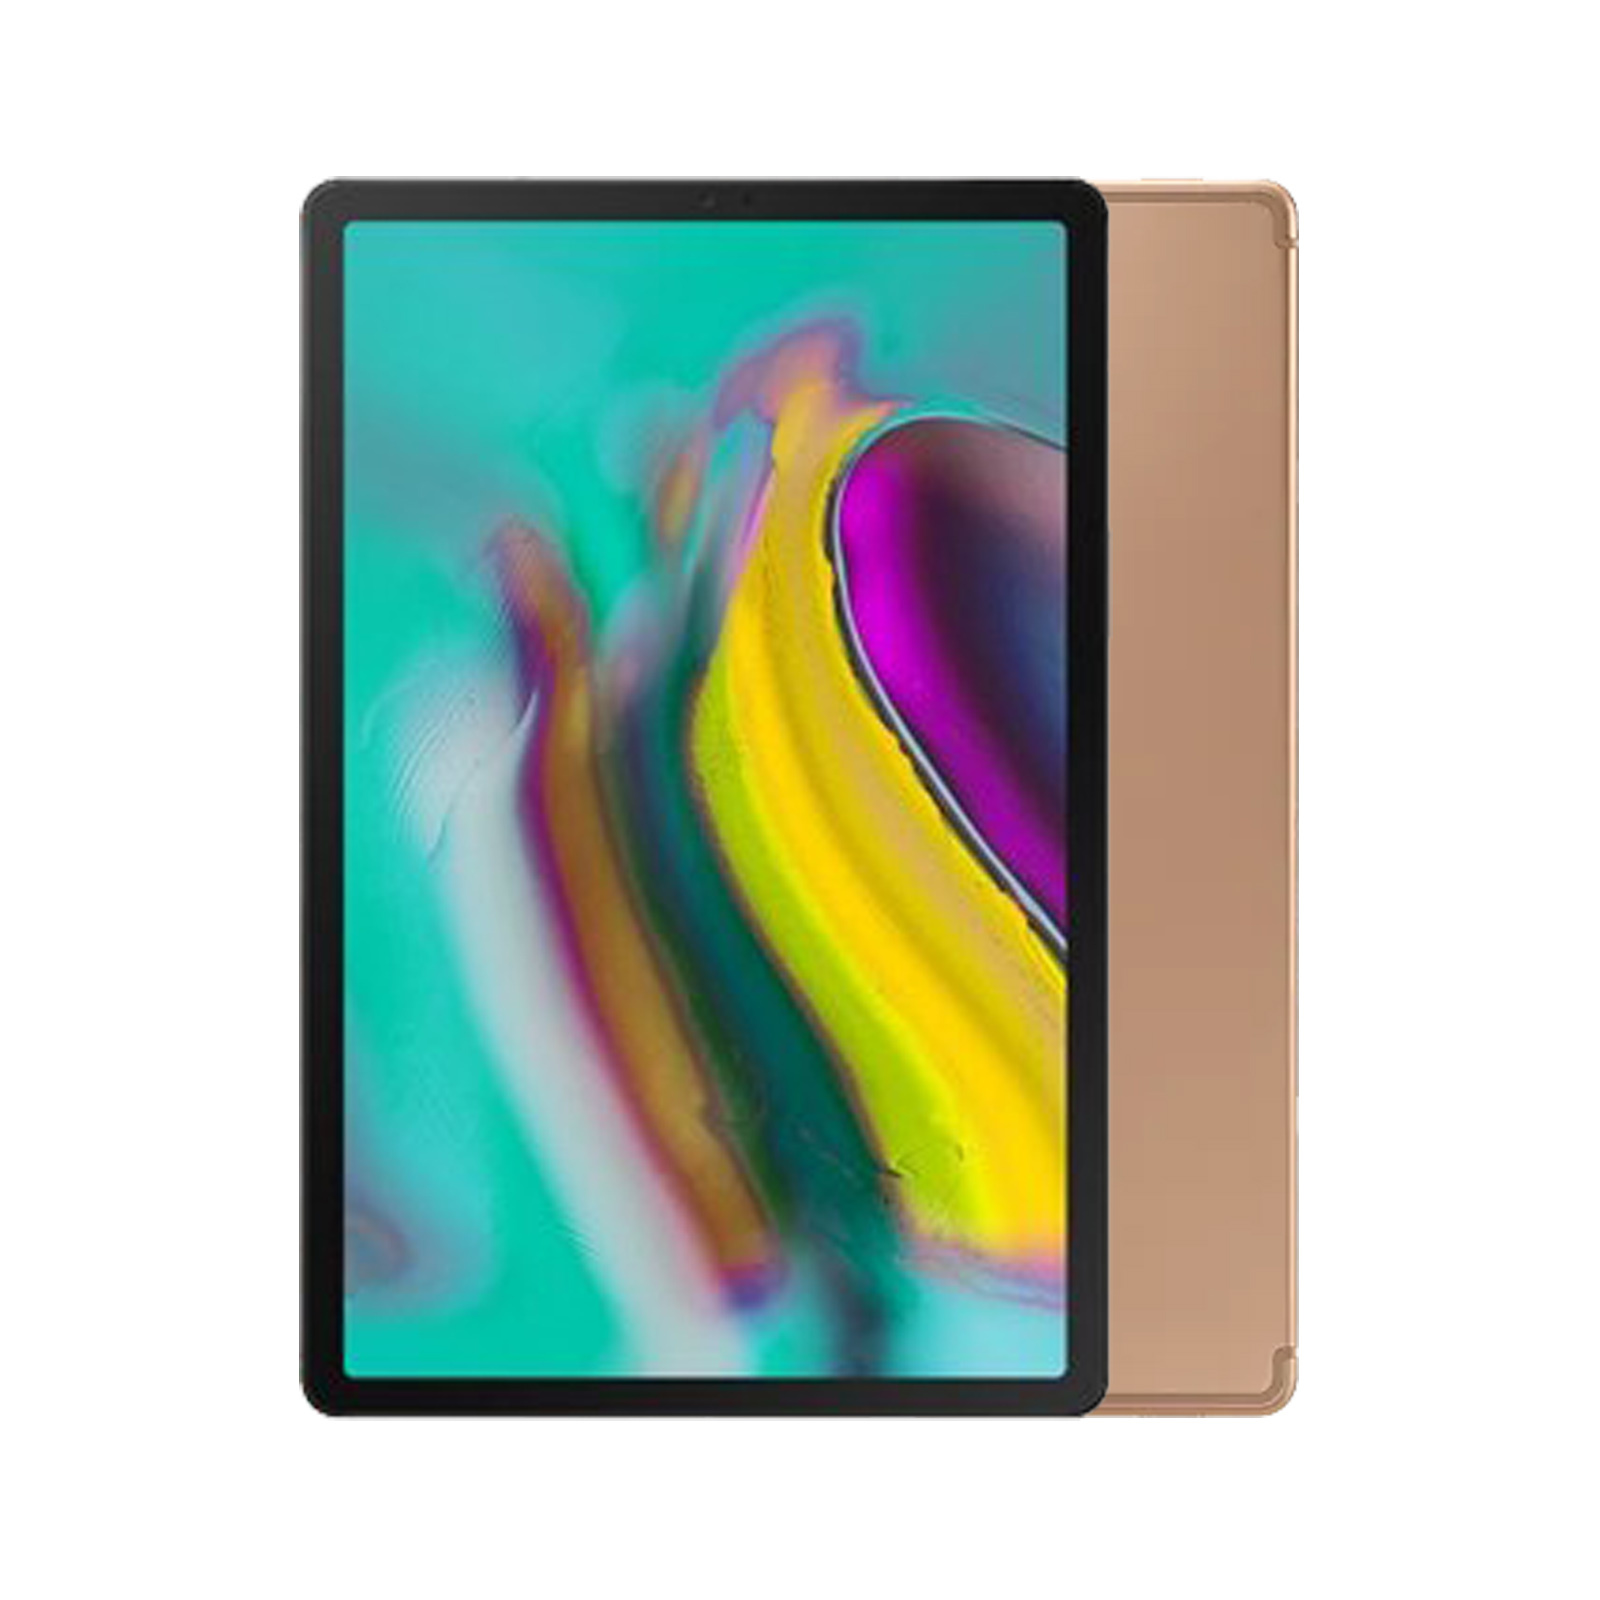 Samsung Galaxy Tab S5e 10.5 [WiFi Only] [64GB] [Gold] [As New]